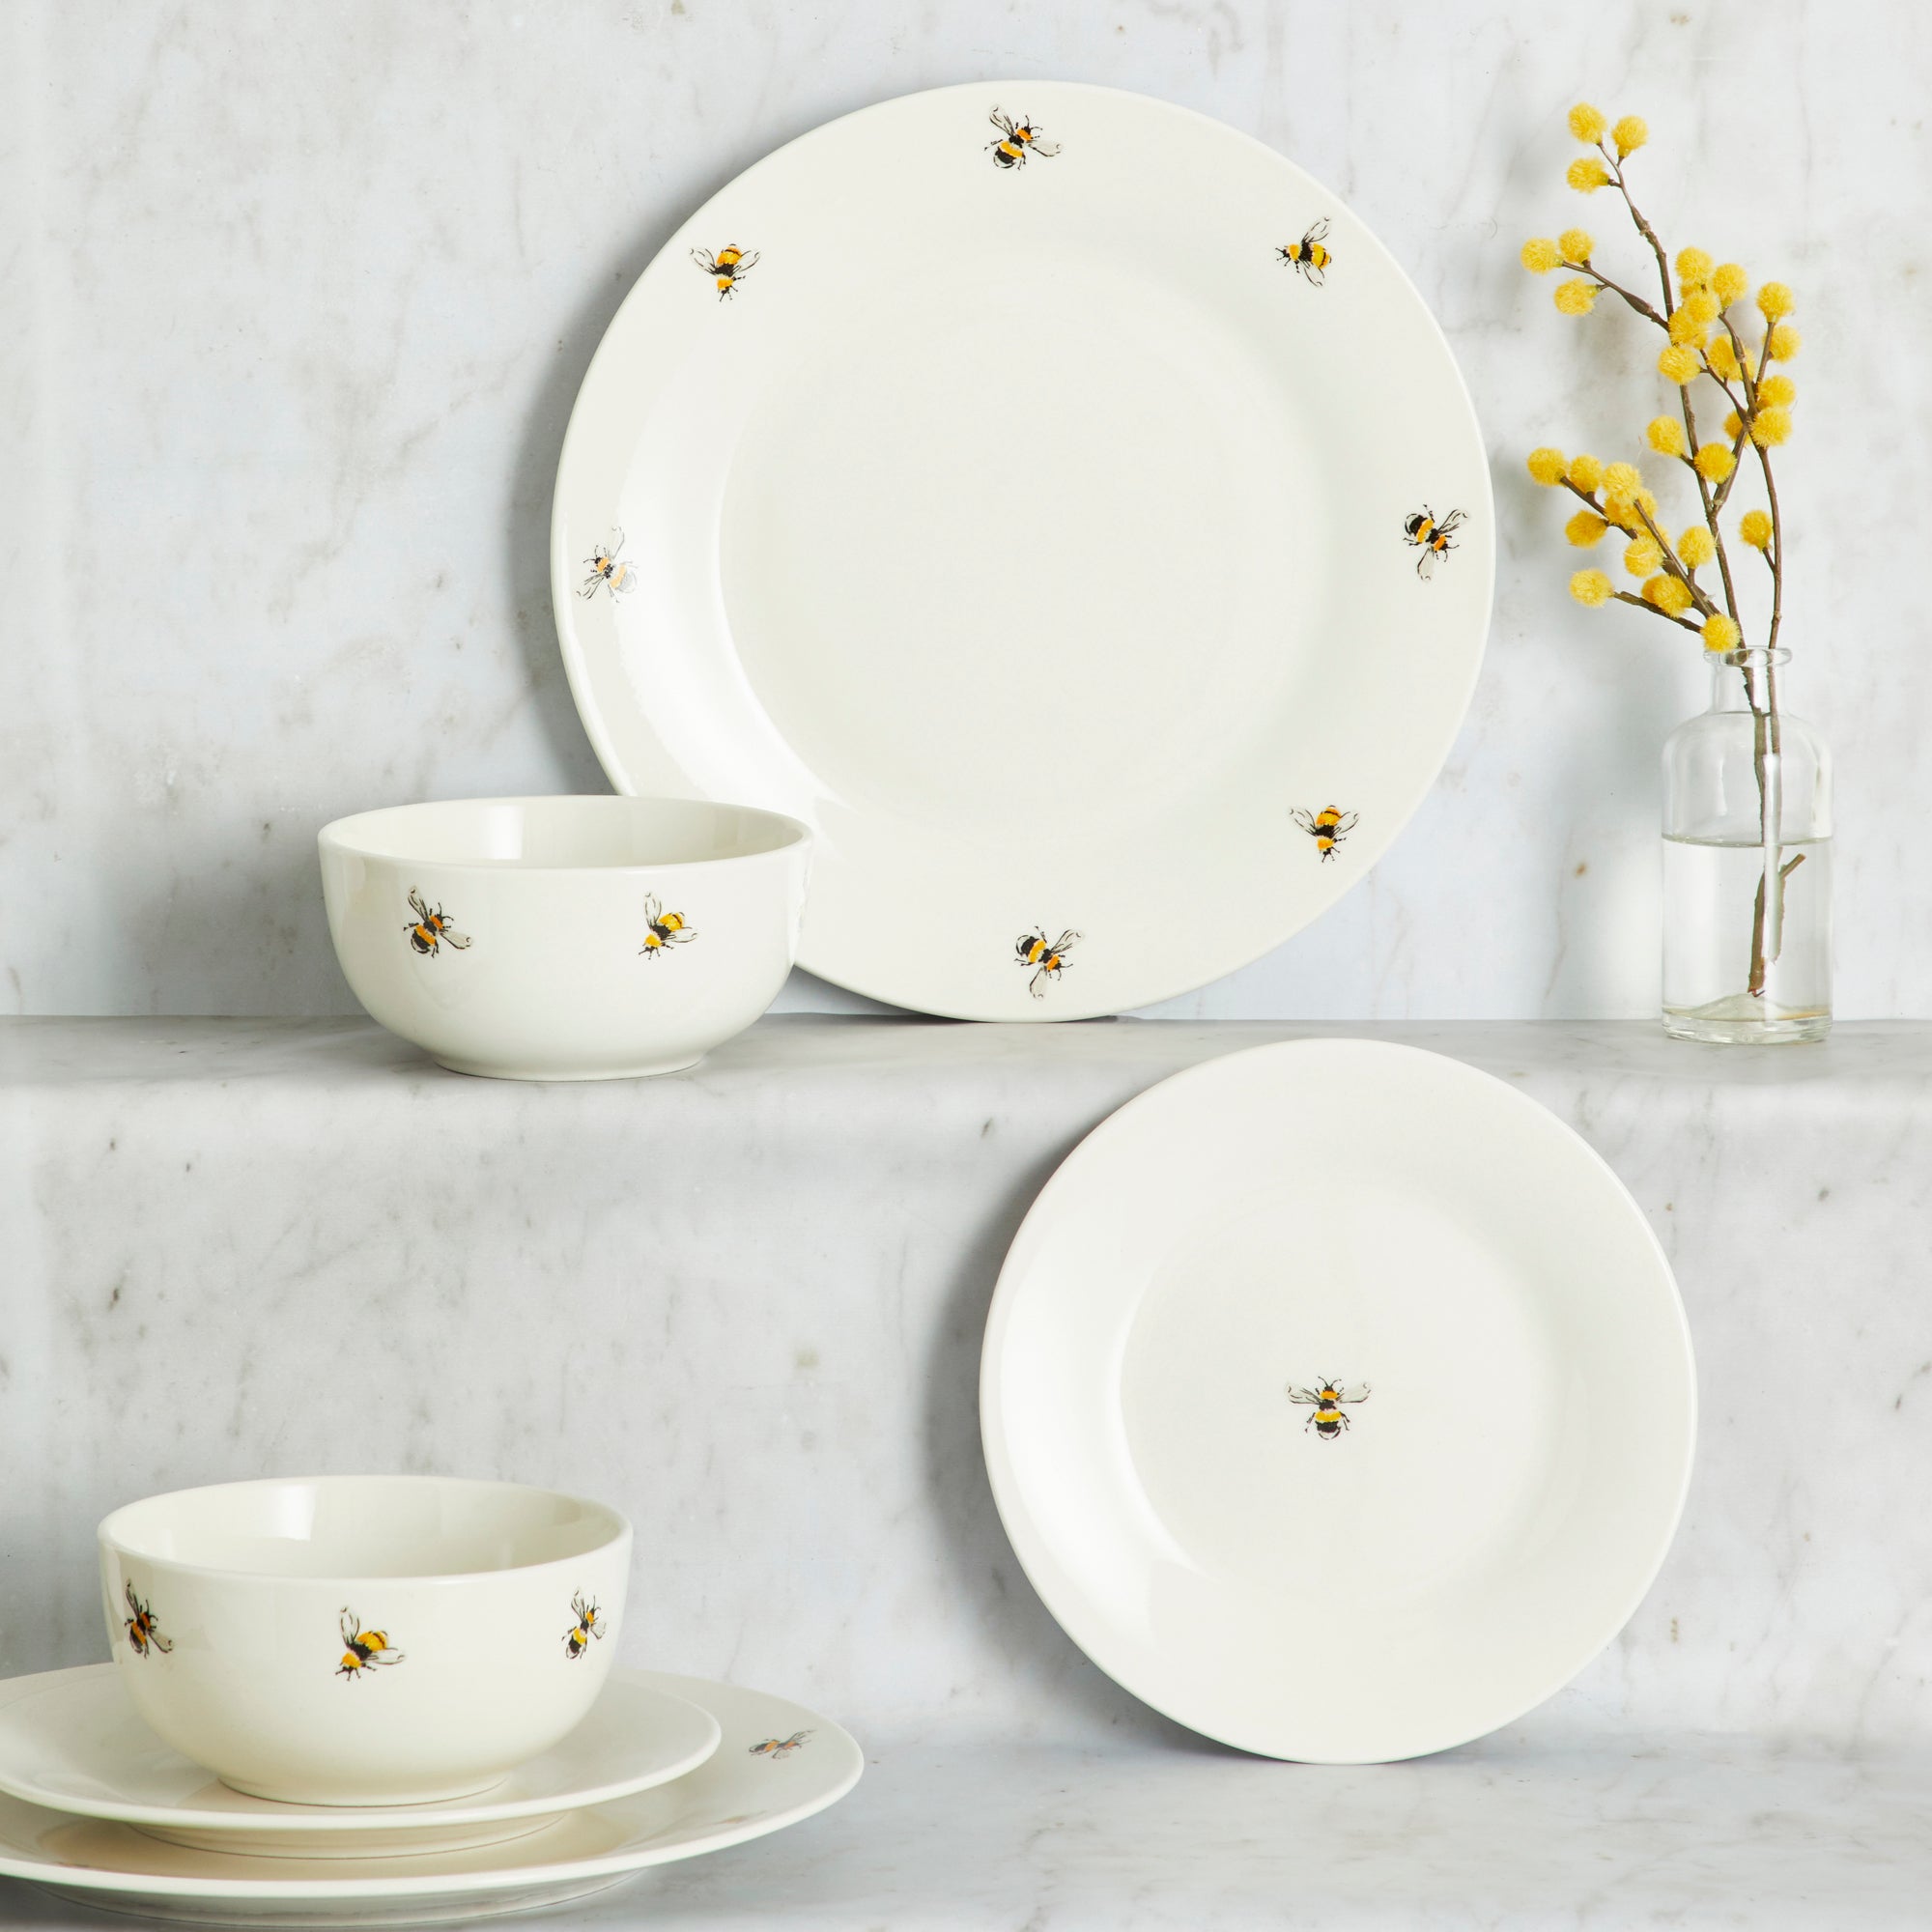 Bee 12 Piece Dinner Set White Yellow and Black